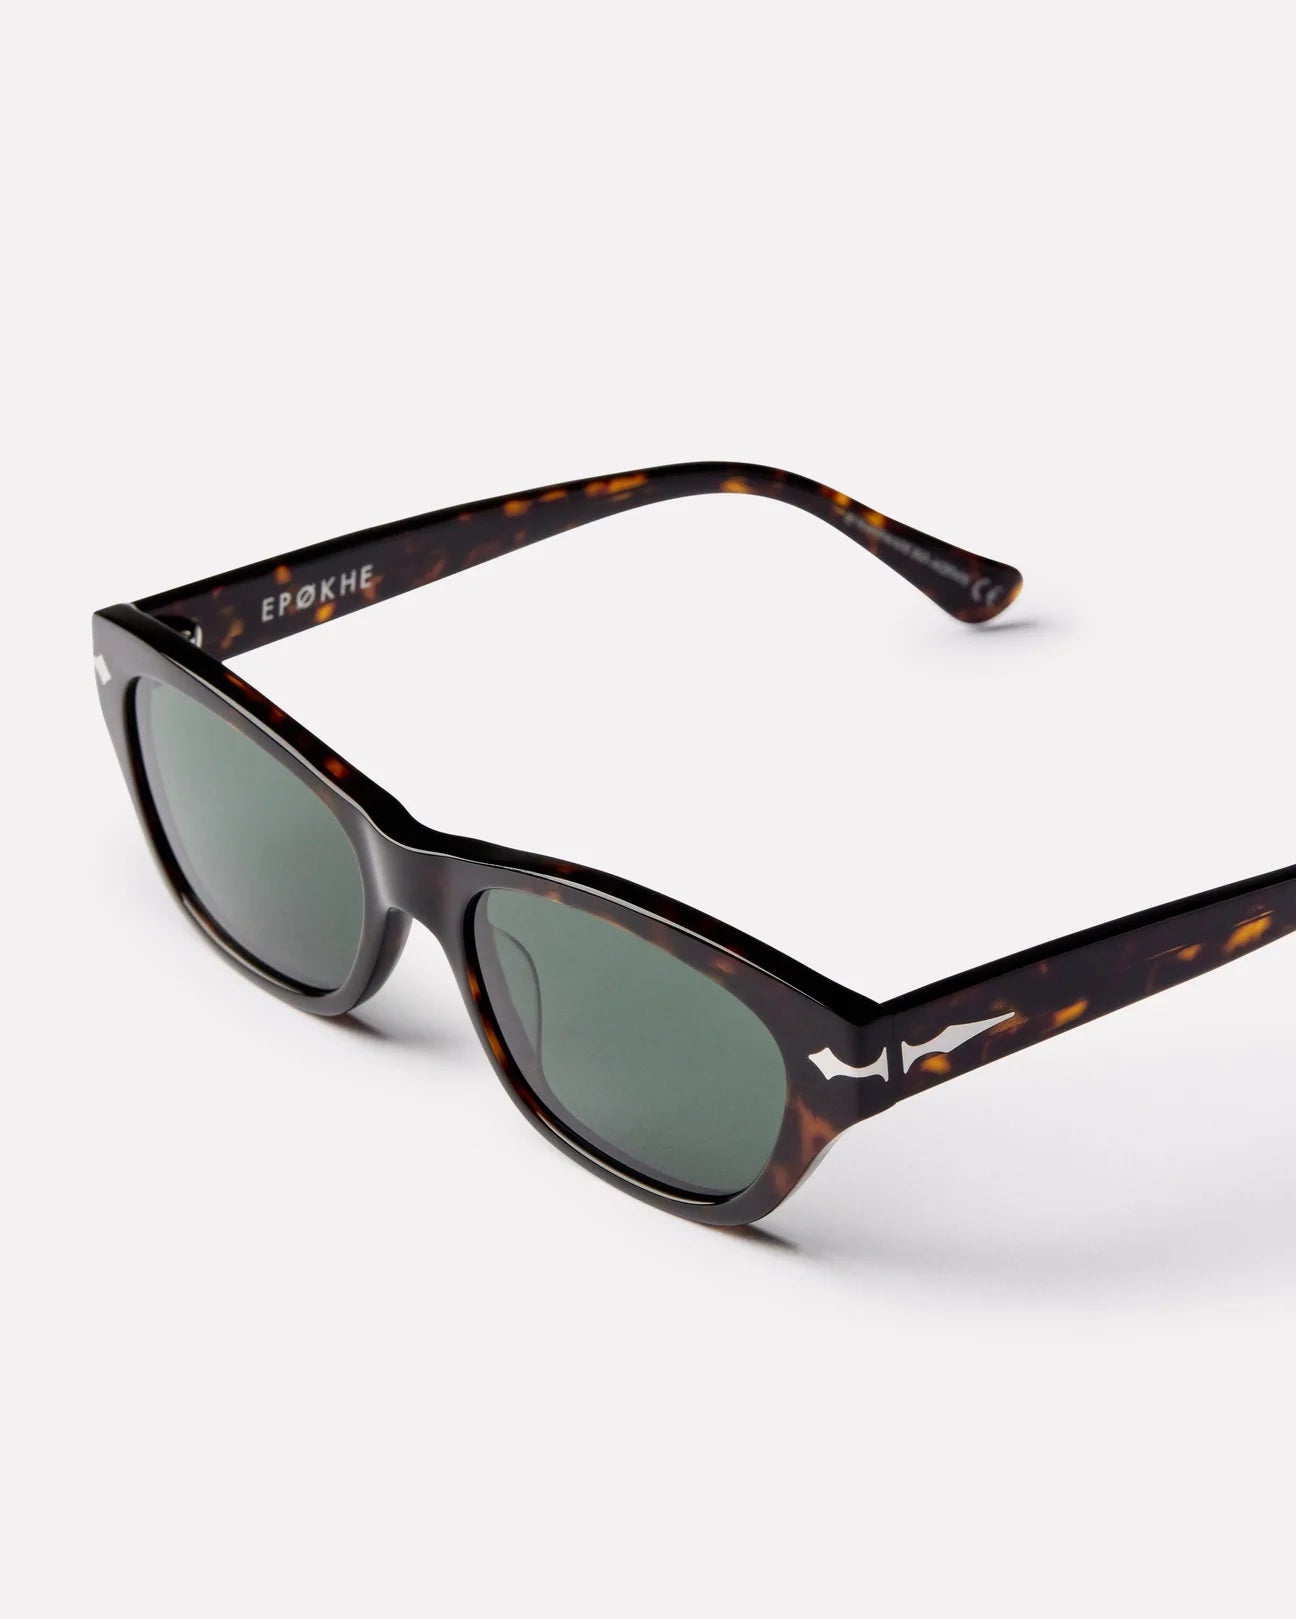 FREQUENCY - Tortoise Polished / Green Polarized